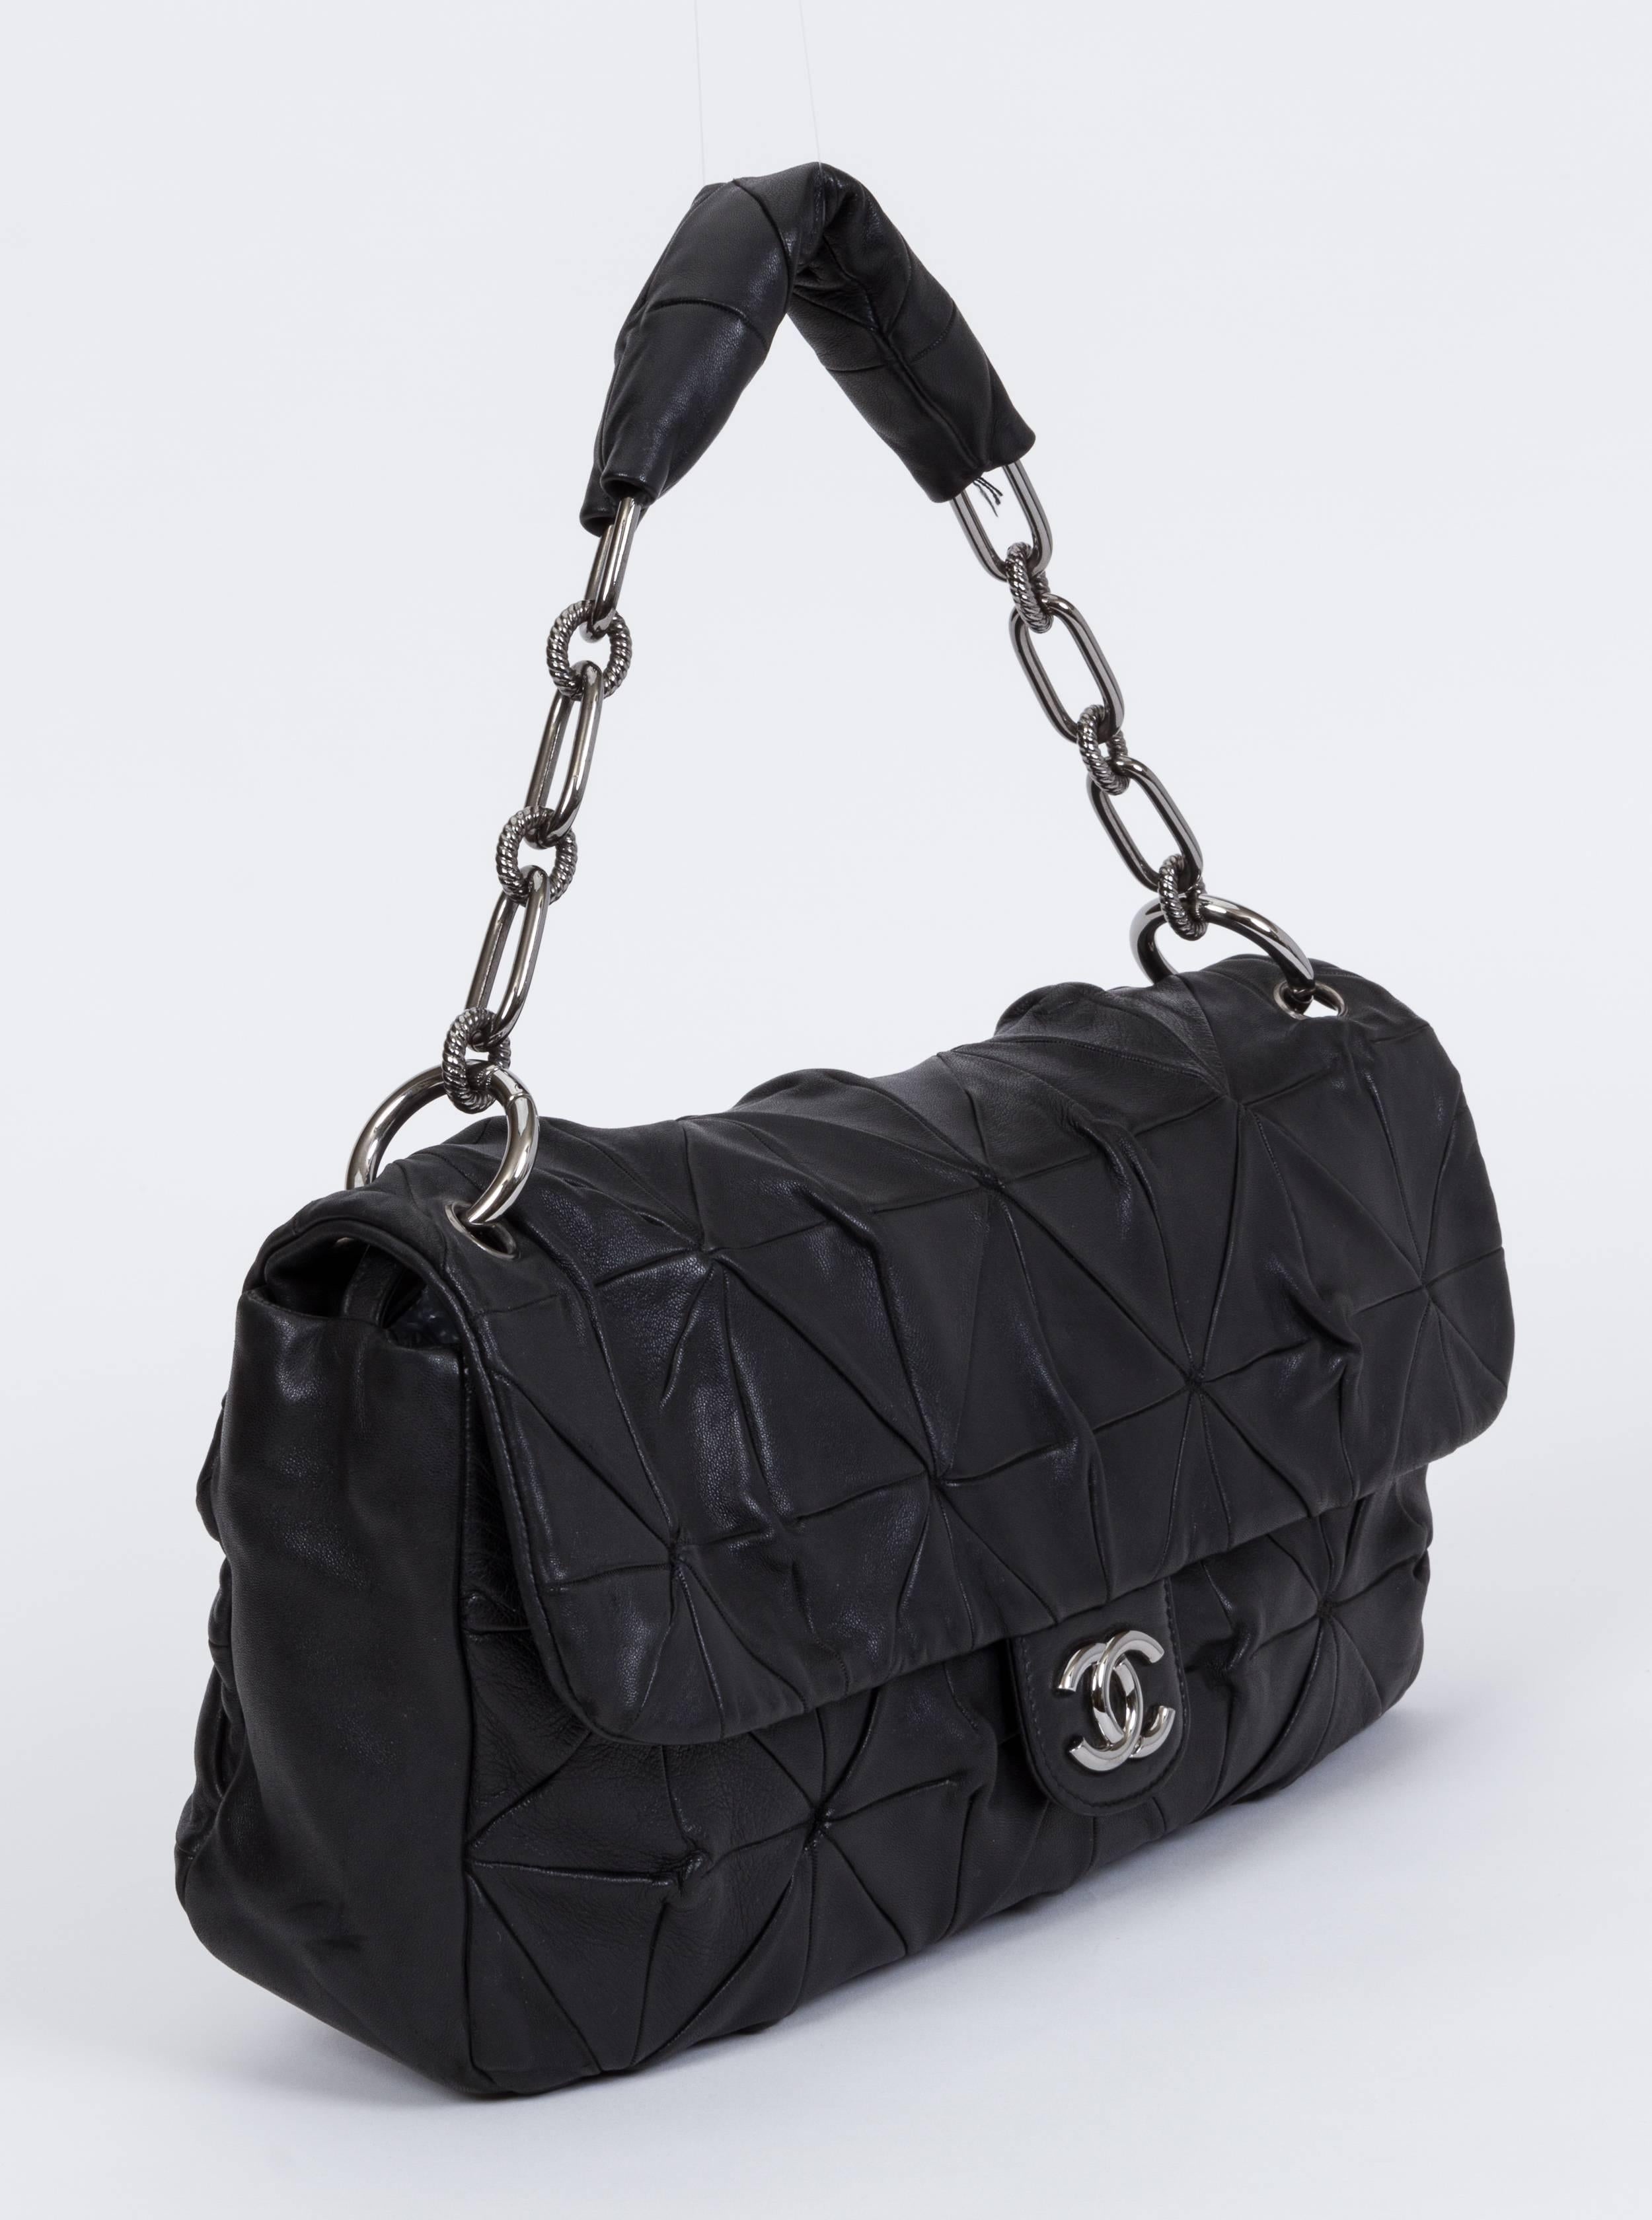 Chanel maxi single flap in black lambskin with silver tone hardware. Origami original quilting. Shoulder drop 8